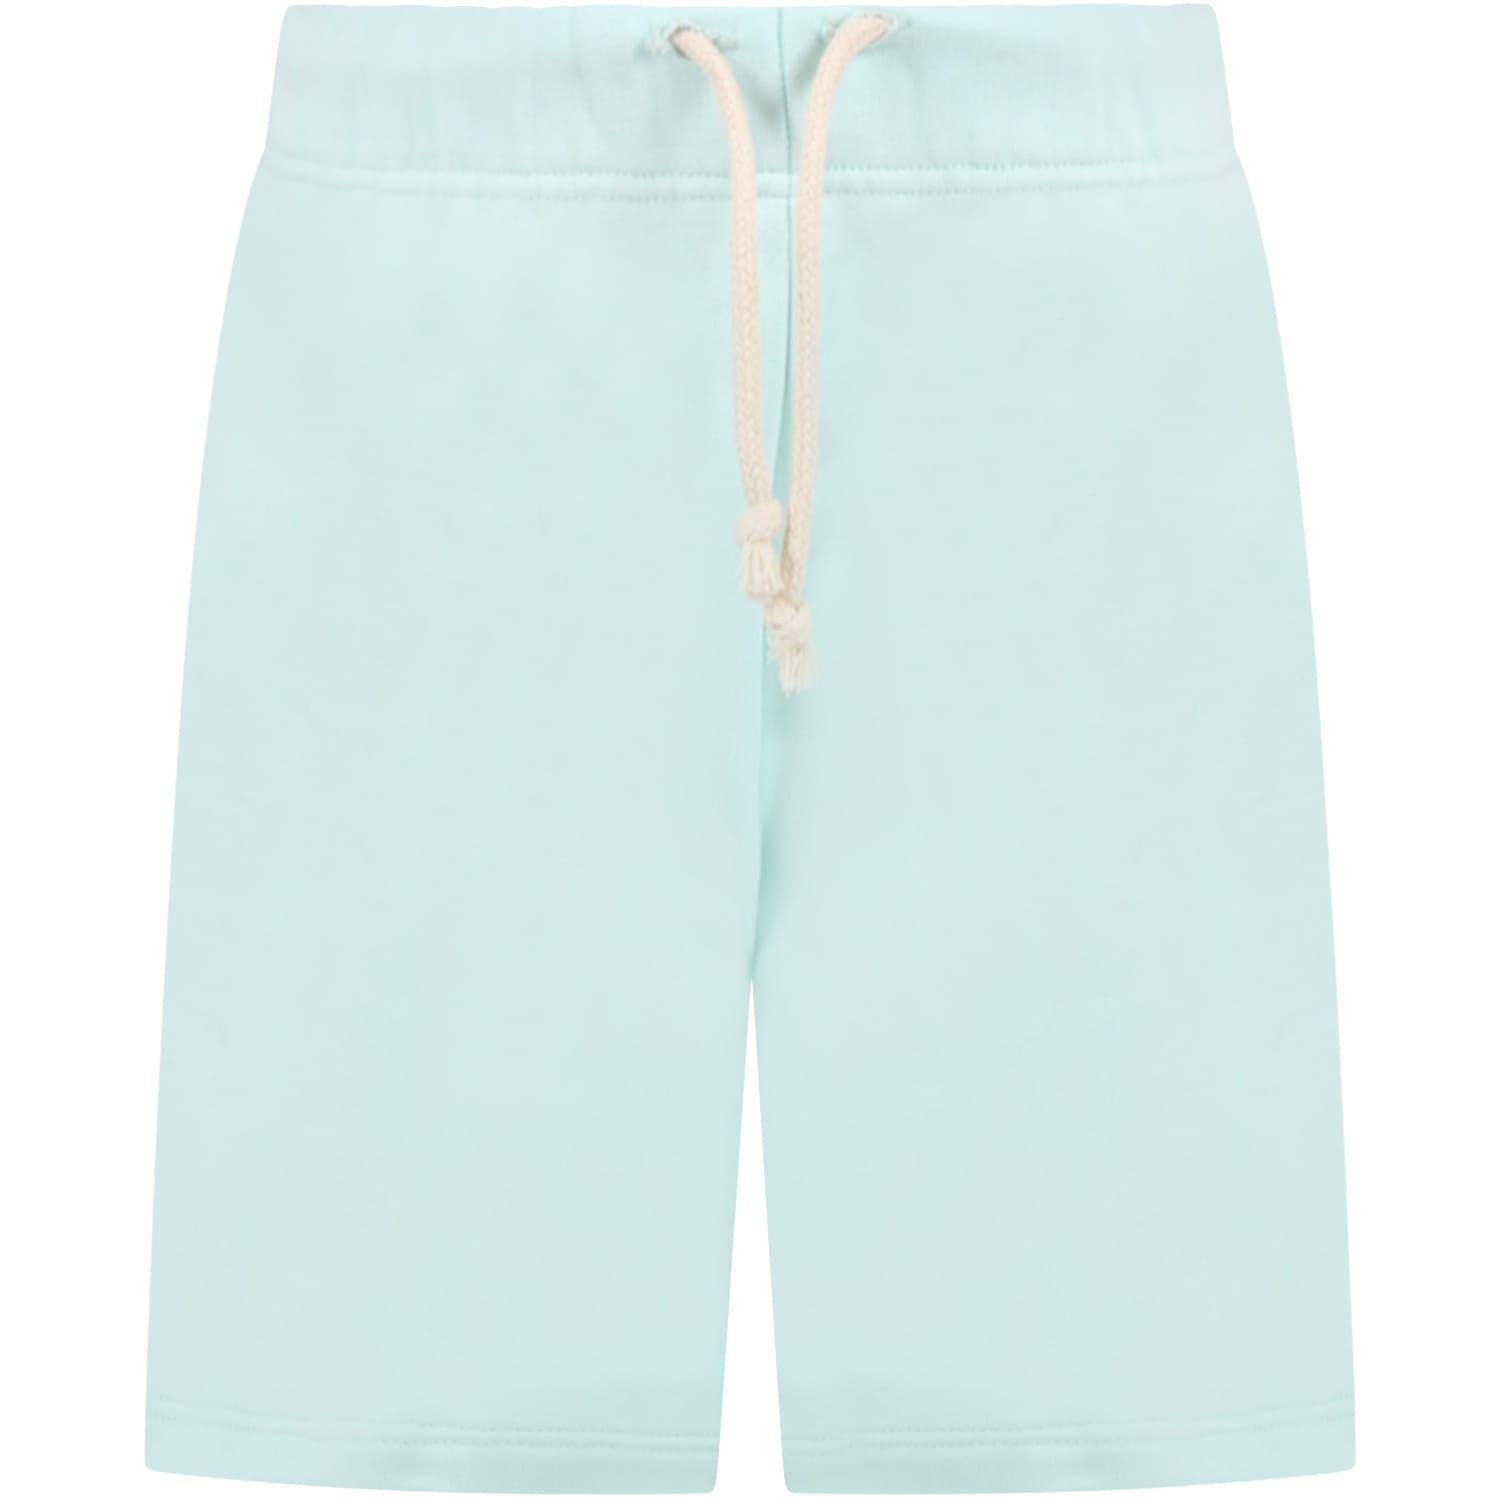 Raquette Teal Green Short For Kids With Racket